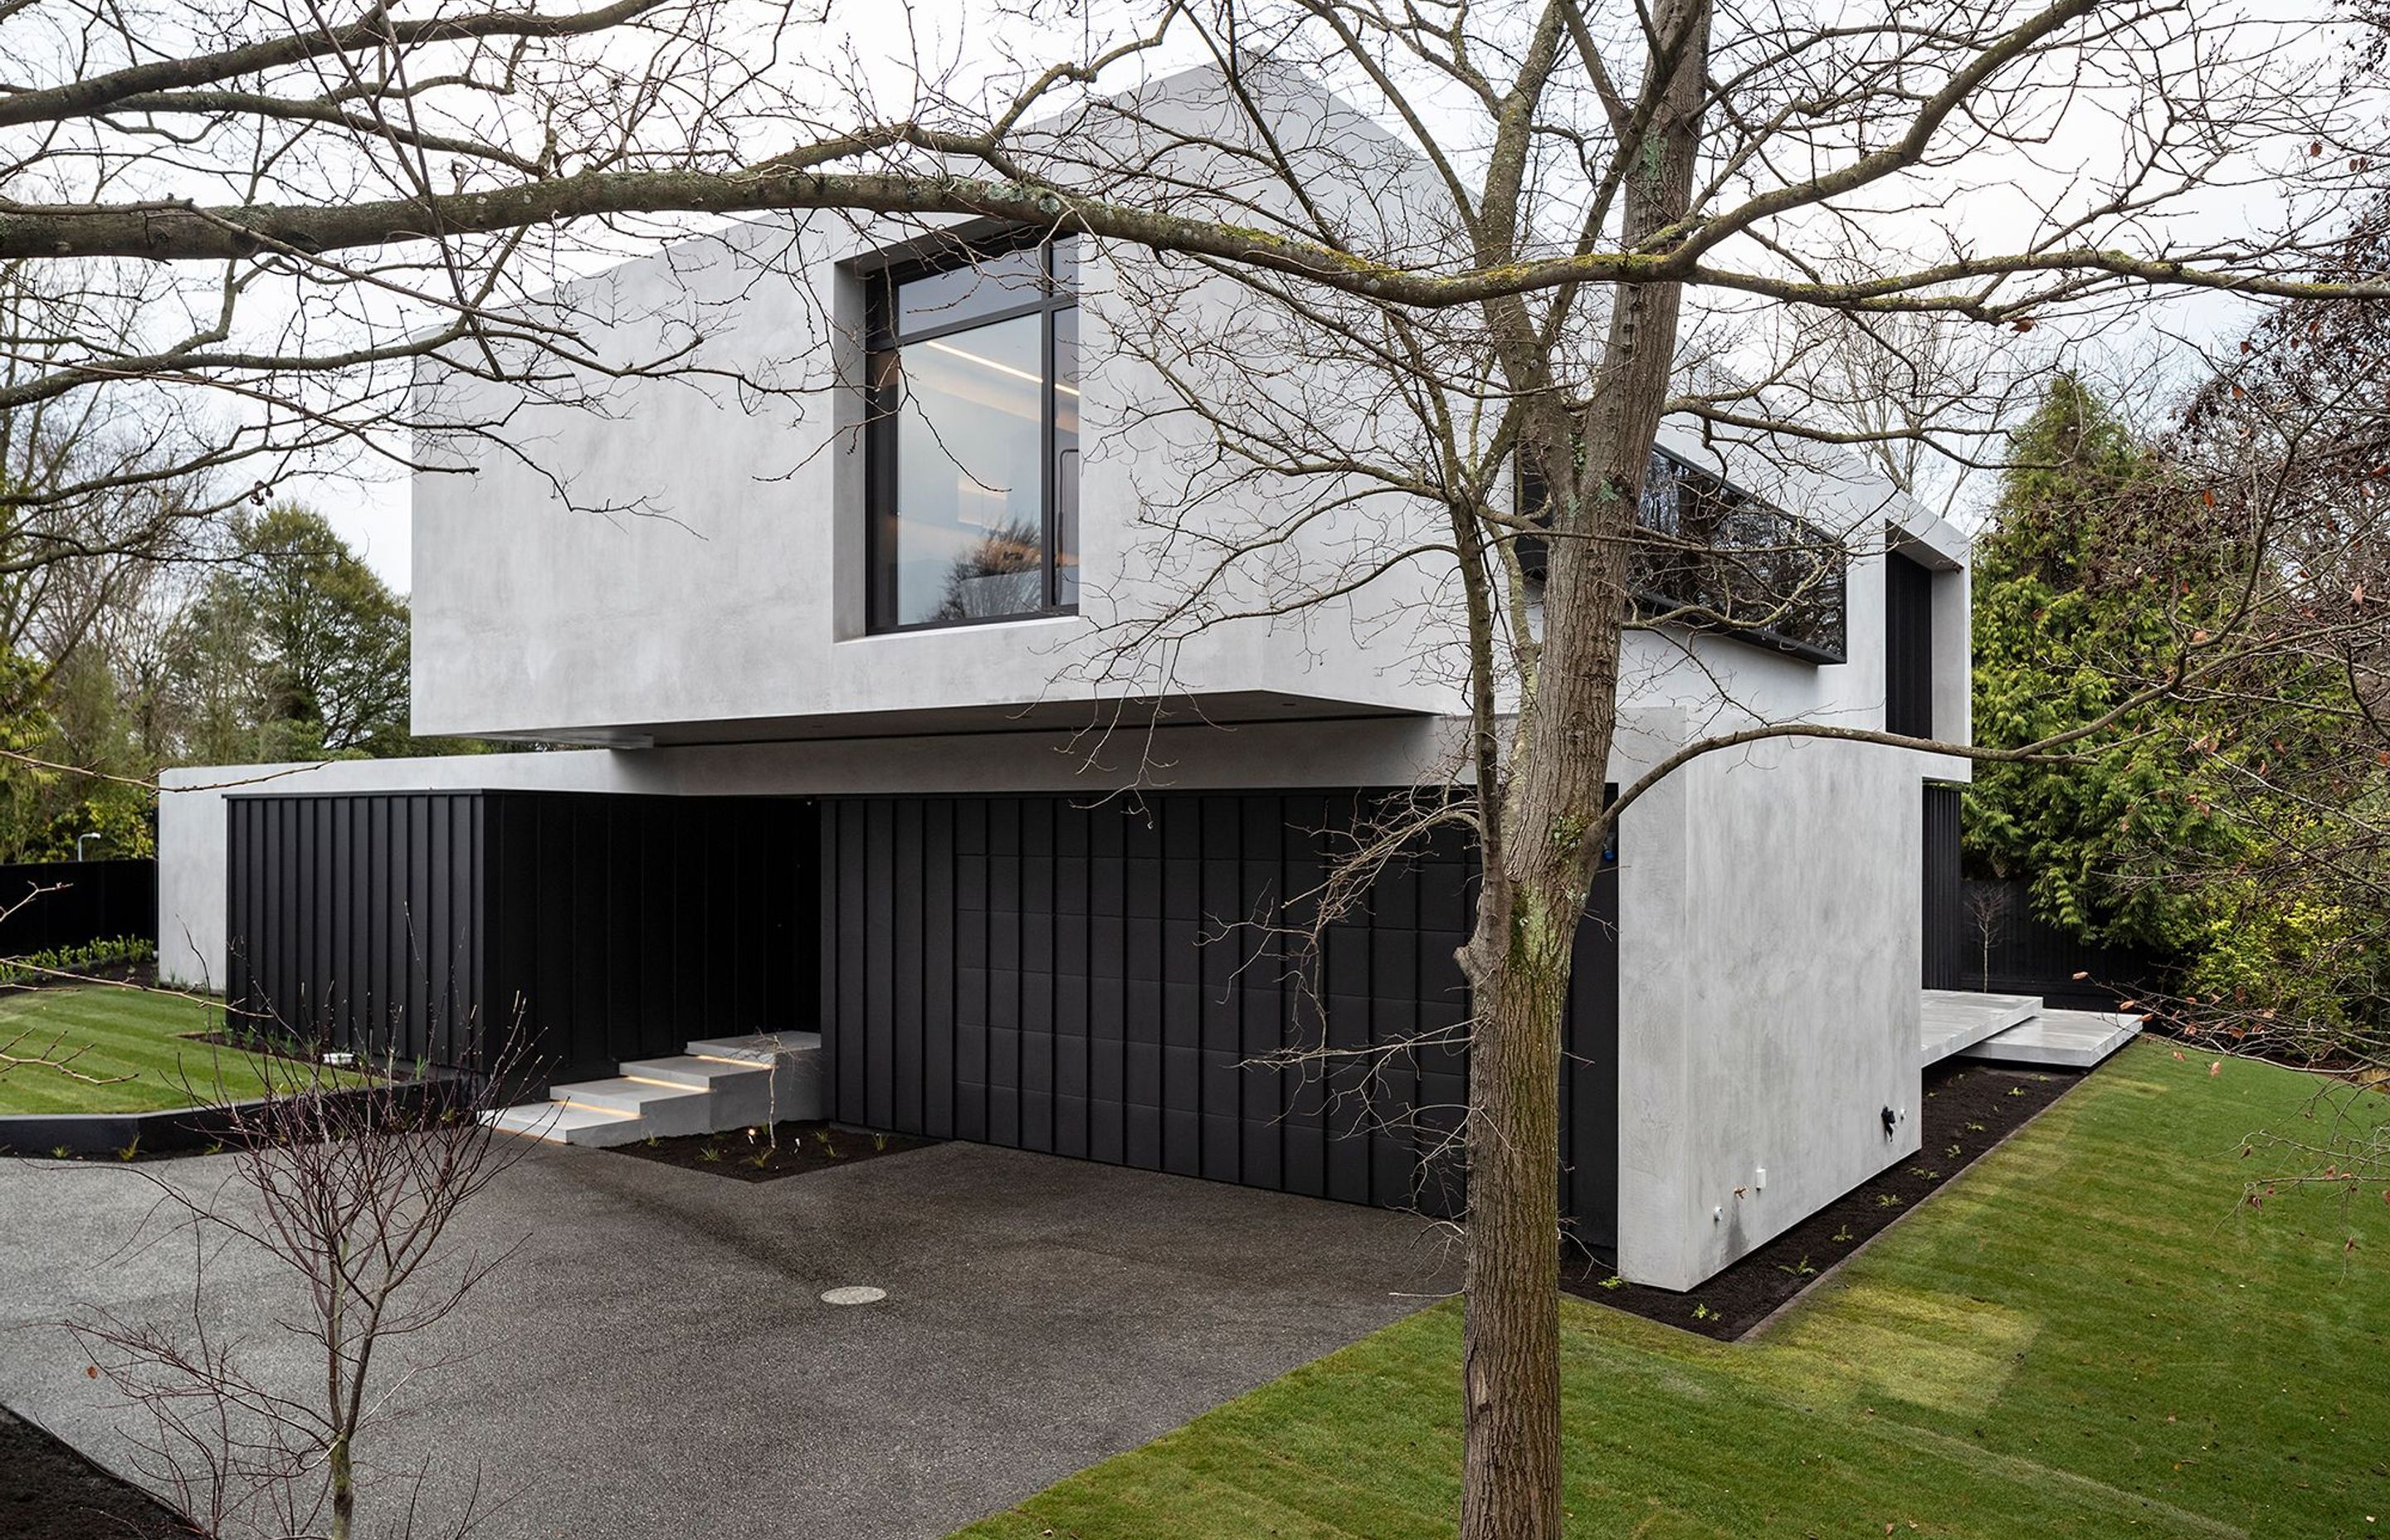 As a nod to the clients' request for a insitu concrete house, which, unfortunately, due to ground conditions was not possible, the exterior has been finished in a burnished concrete render.